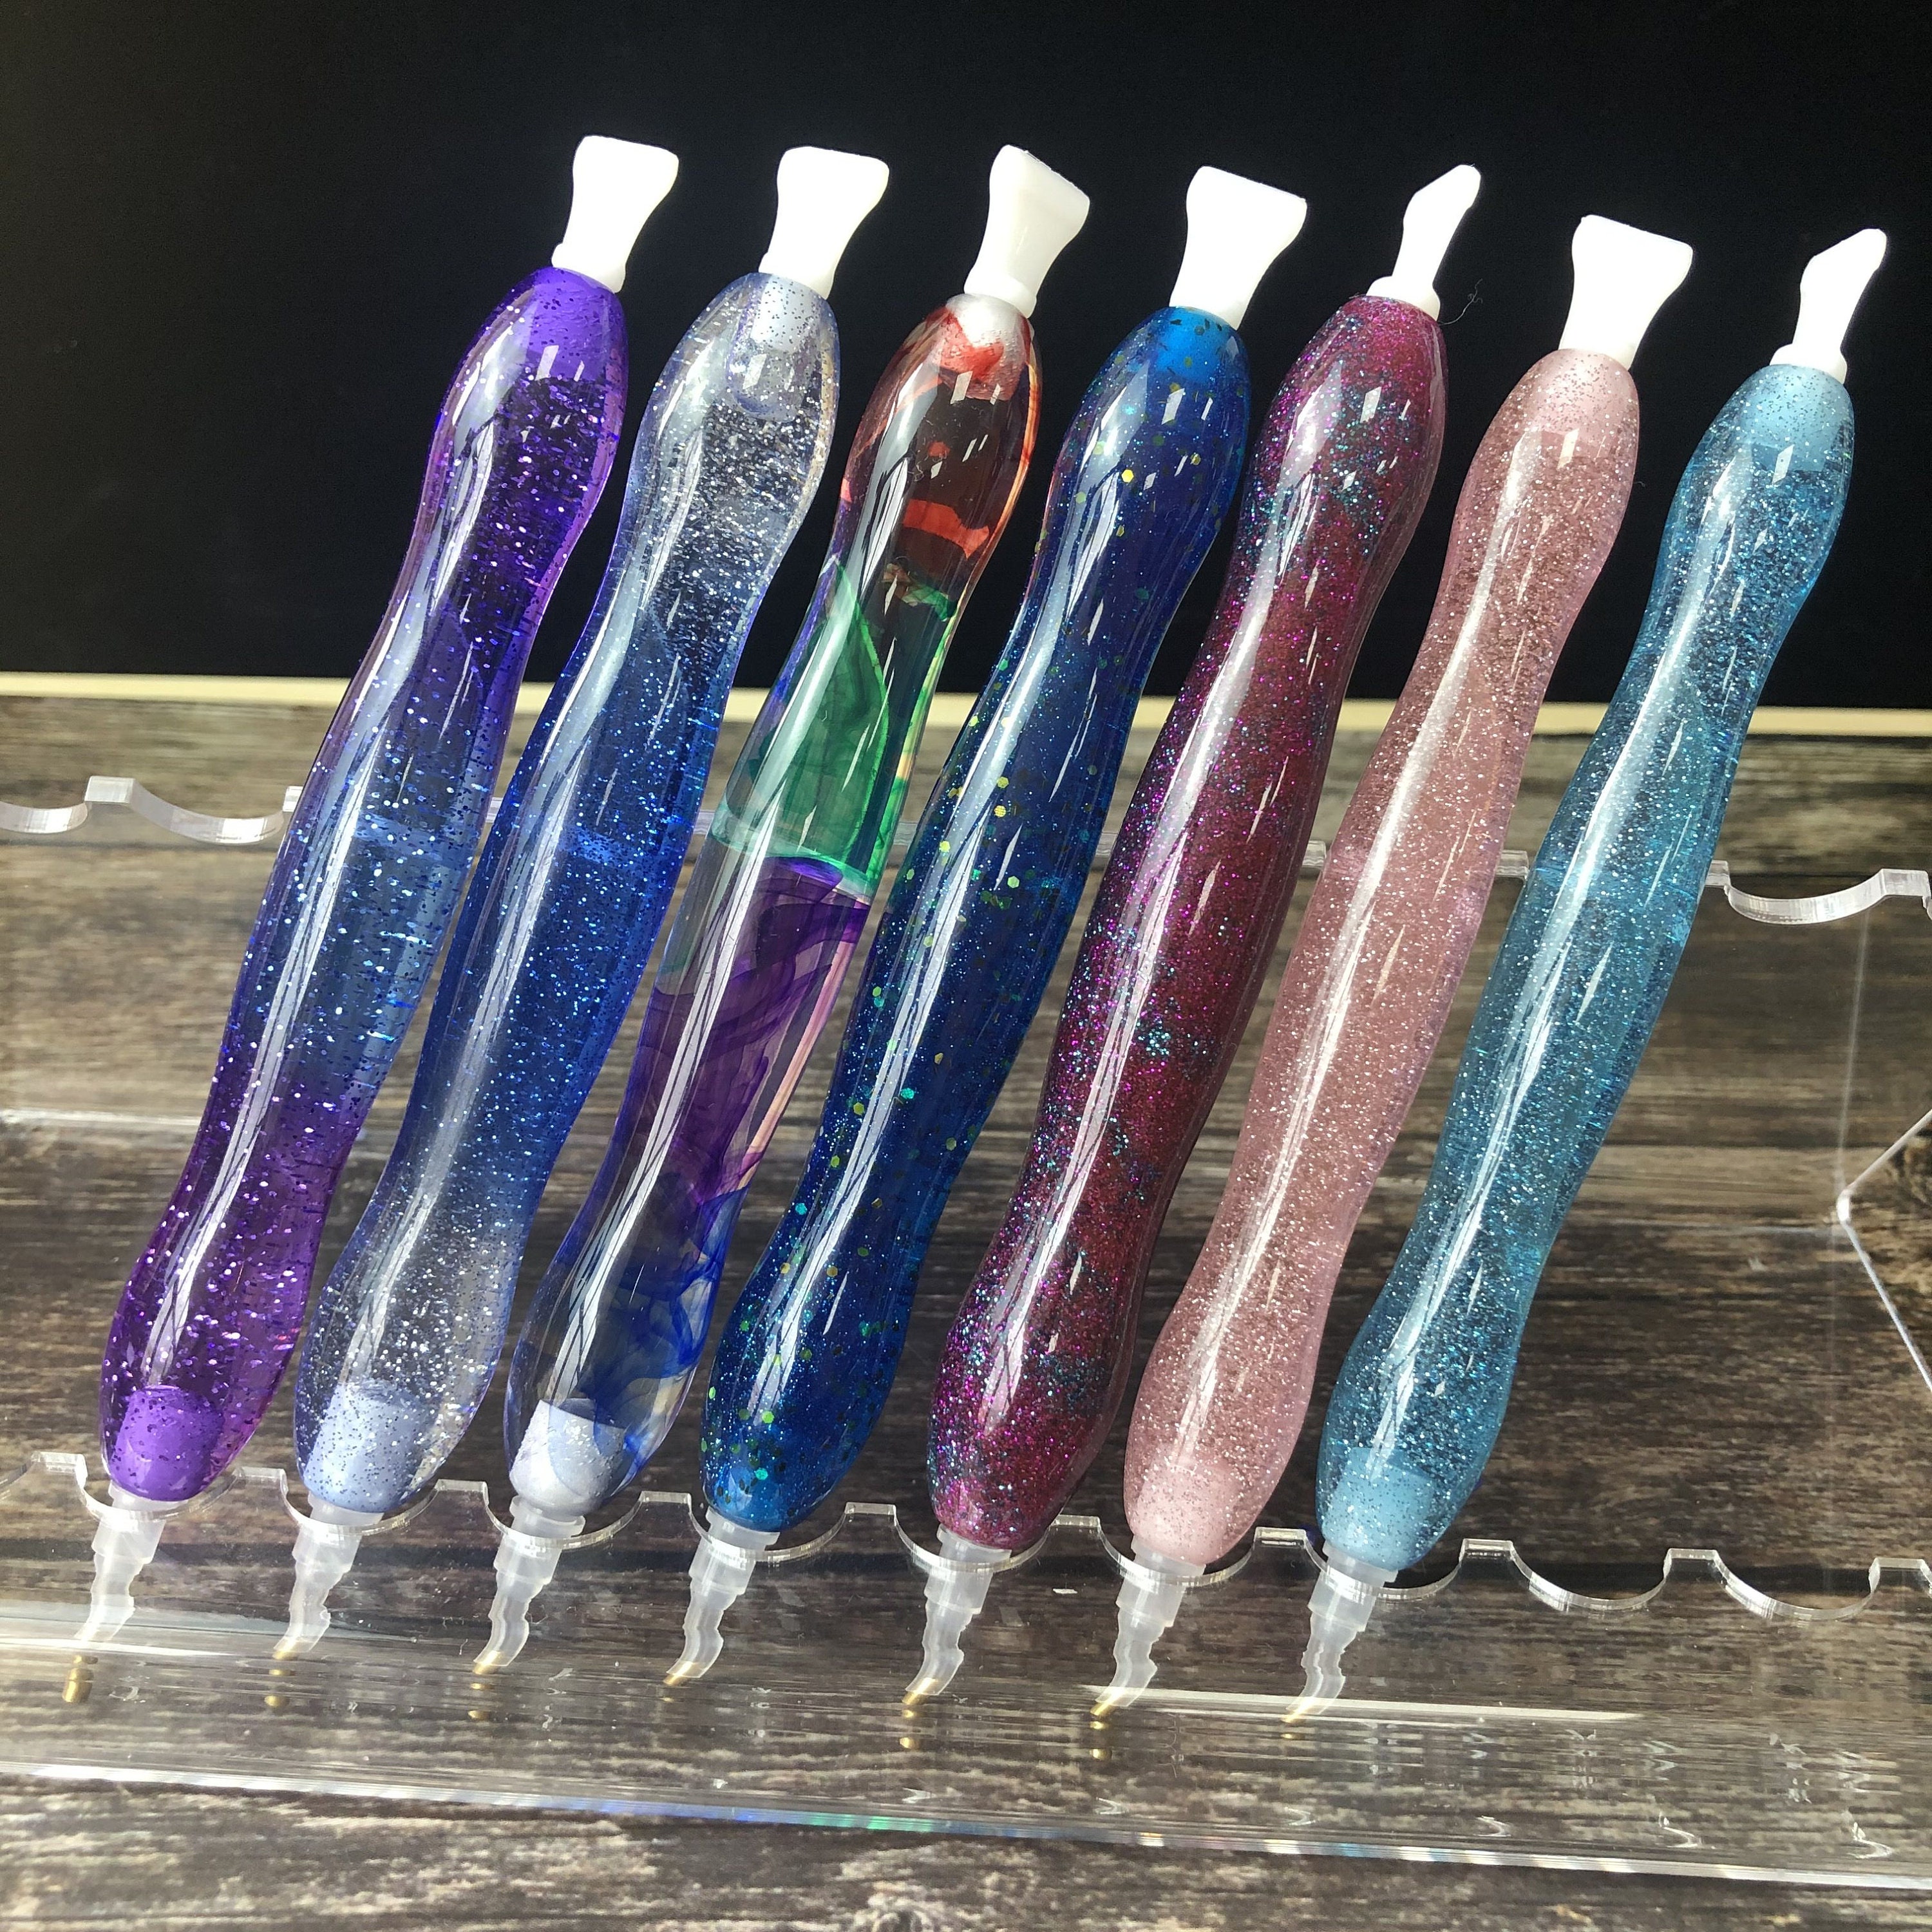 2021 NEW】DIY Diamond Painting Pen Tools Accessories Point Drill Pen Pens  Rhinestones Pictures Handmade Resin Diamond Pen for 5D Painting Diamonds  Mosaic Resin Painting Kit